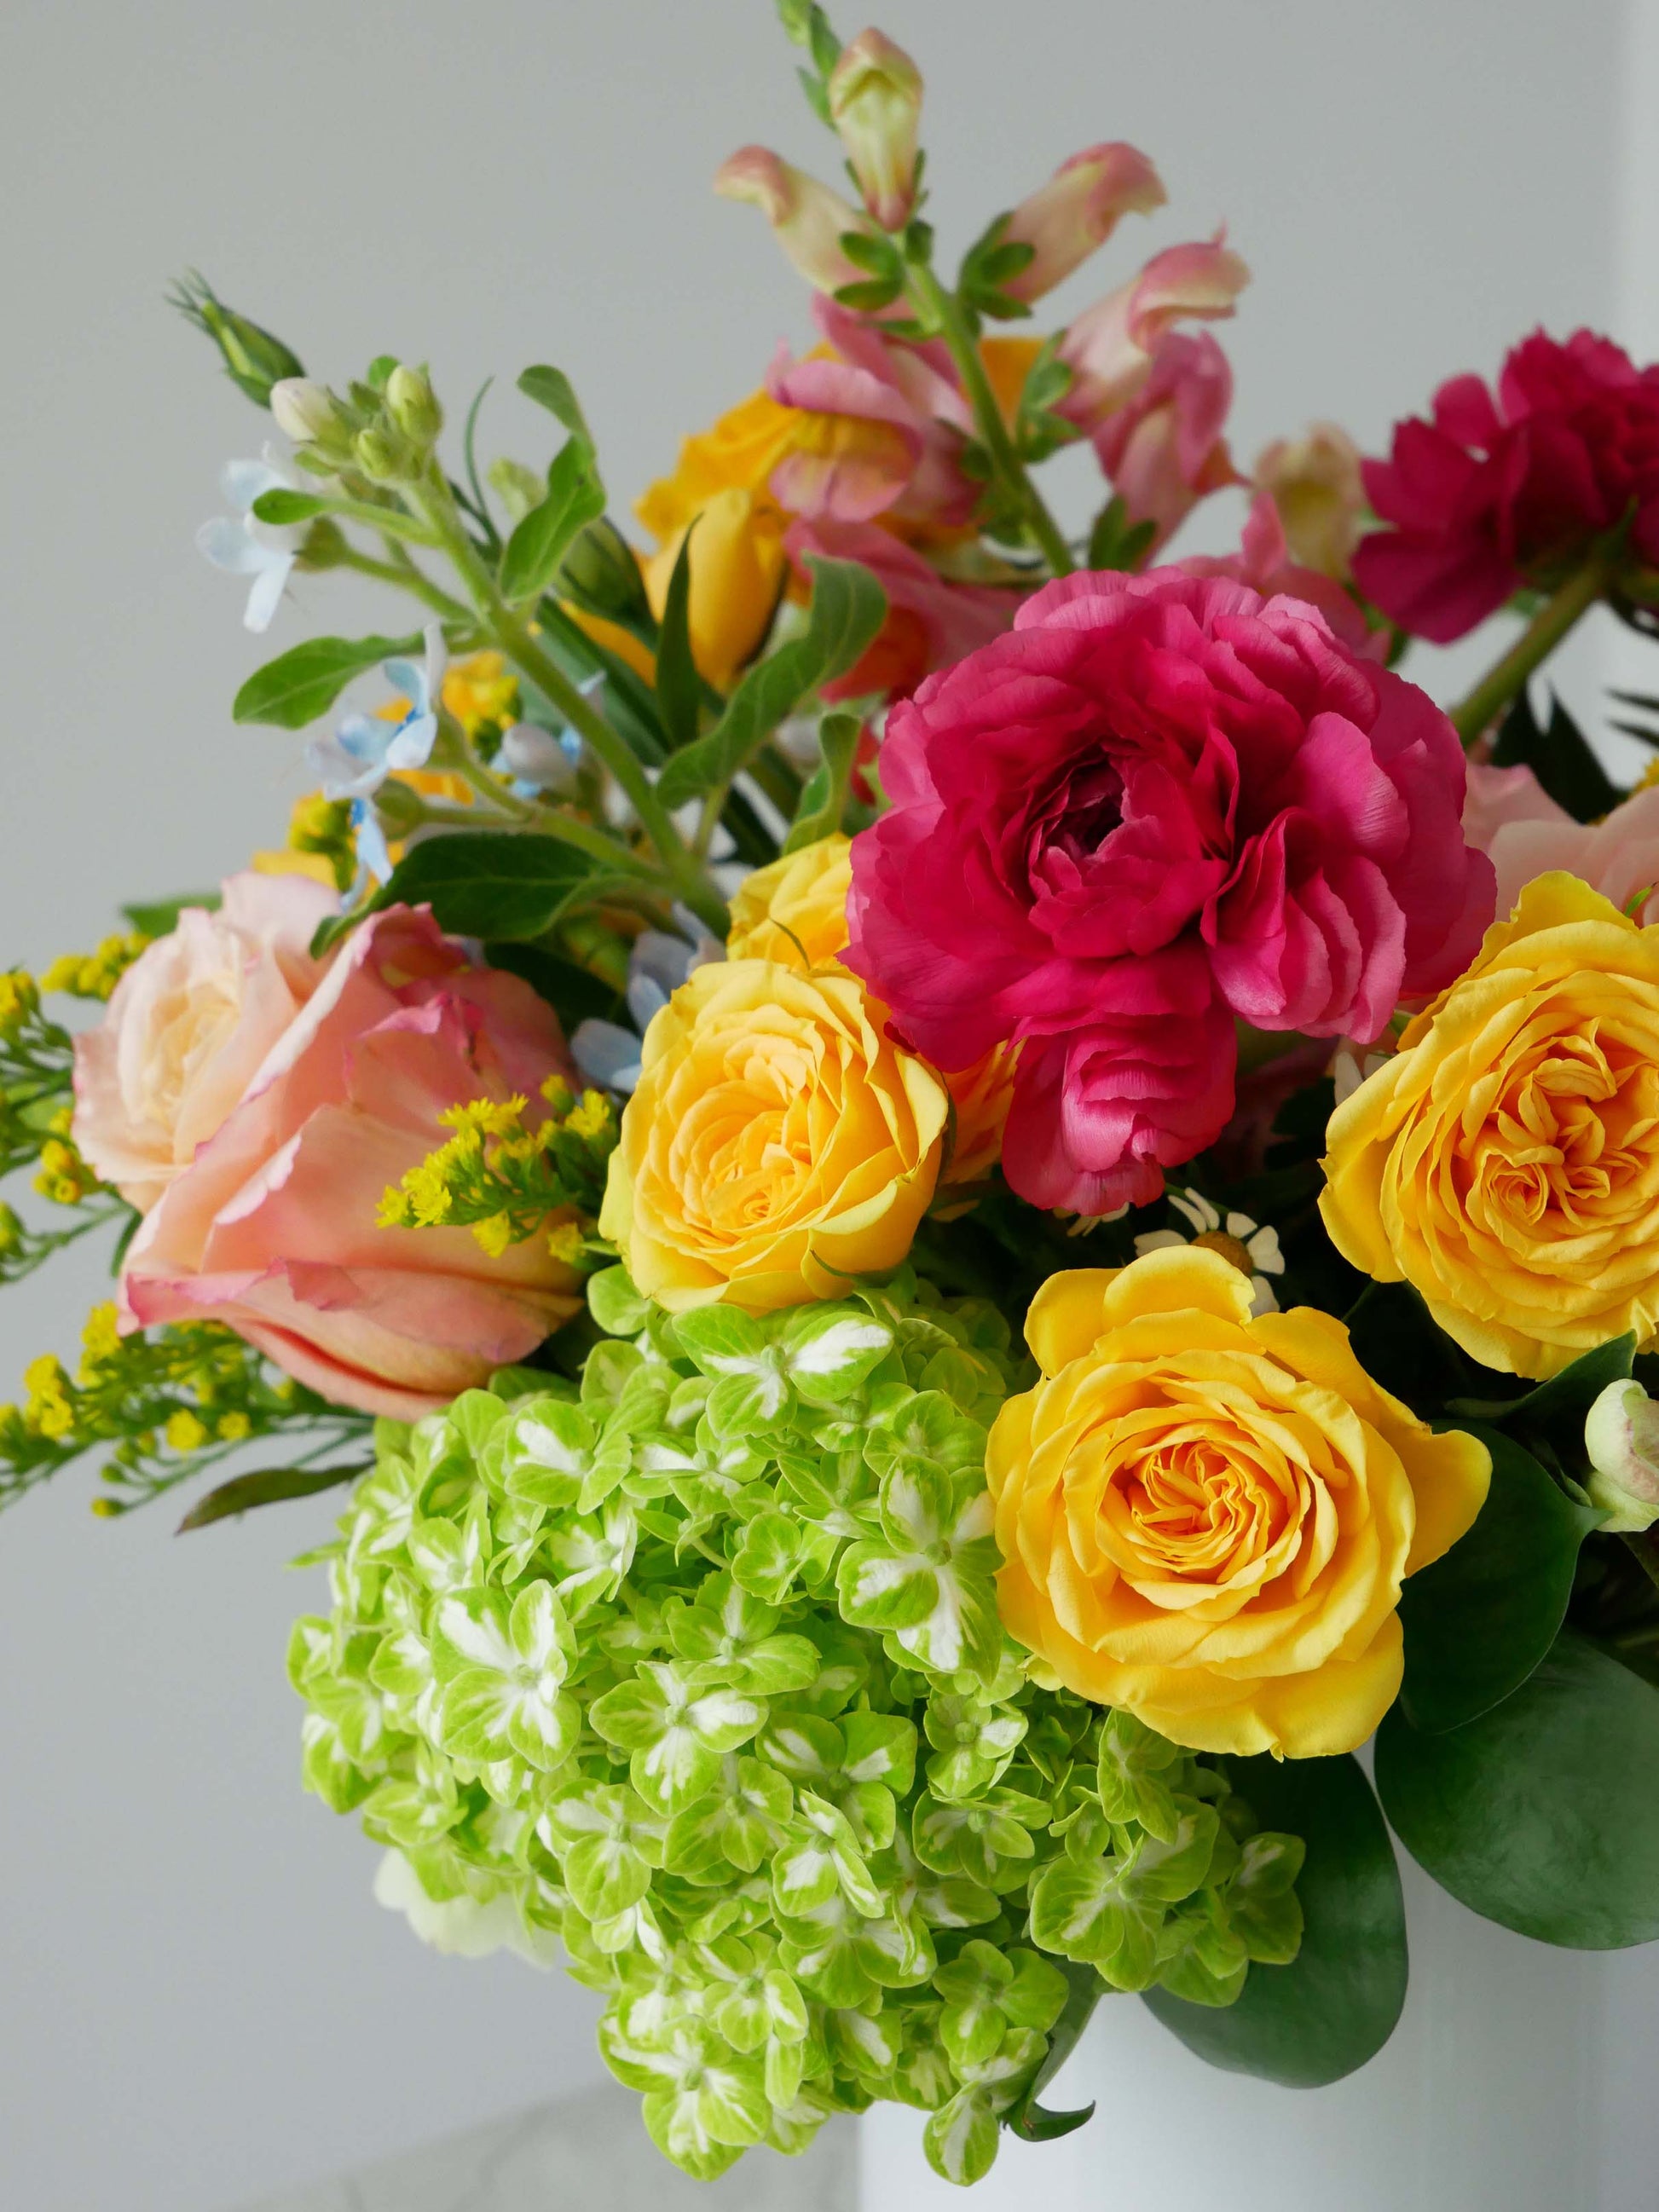 Close-up on Premium size flower arrangement in low white cylinder featuring hot pink ranunculus, yellow roses, peachy roses and greens